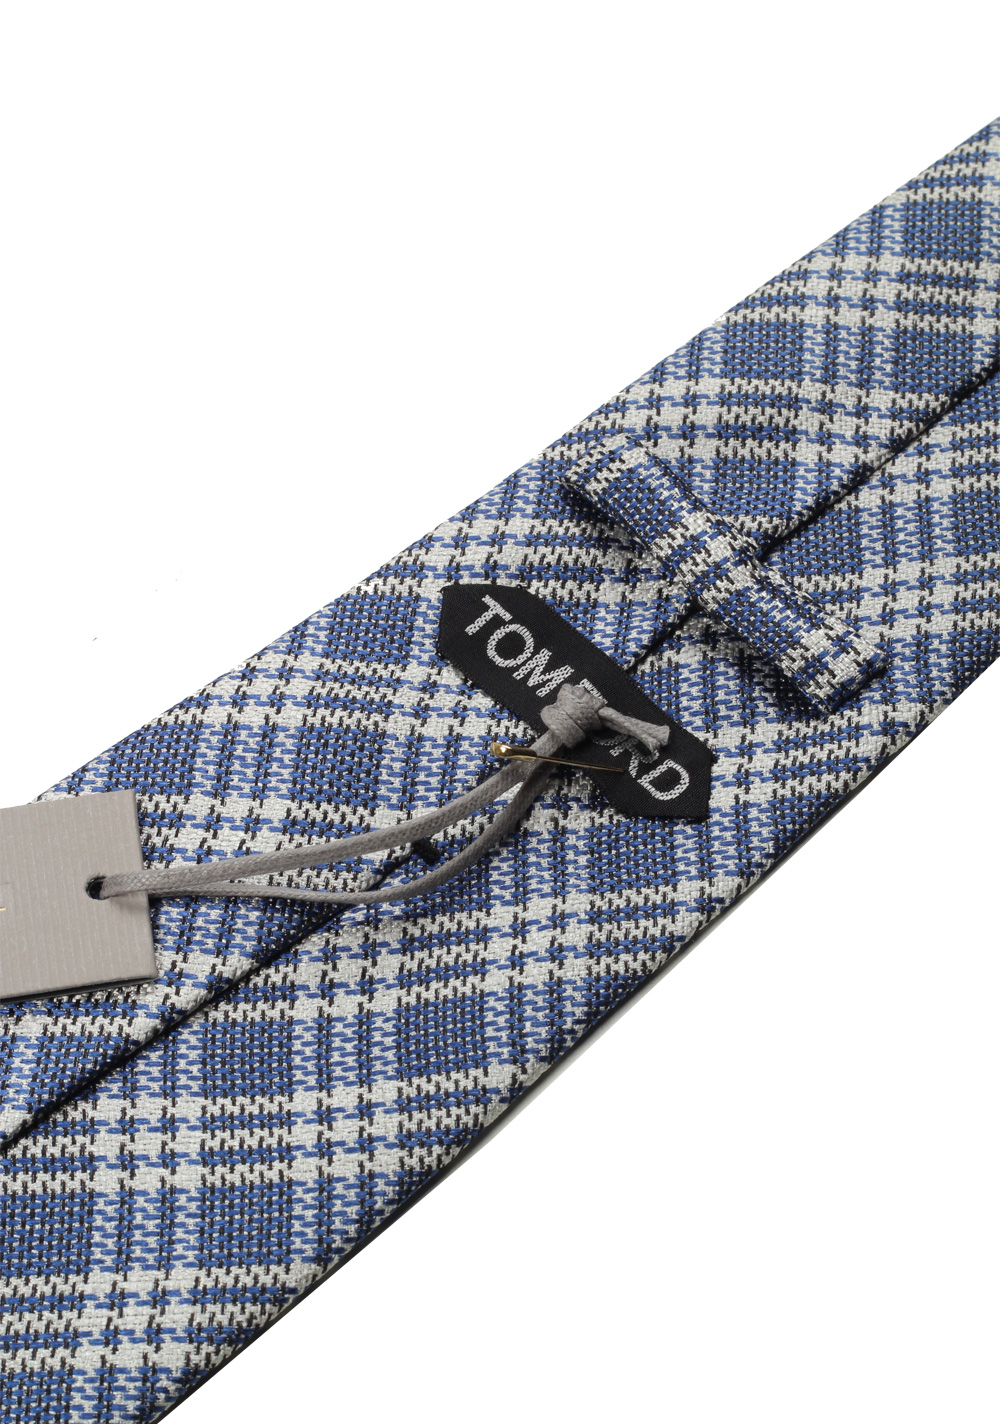 TOM FORD Checked Blue Tie In Silk | Costume Limité